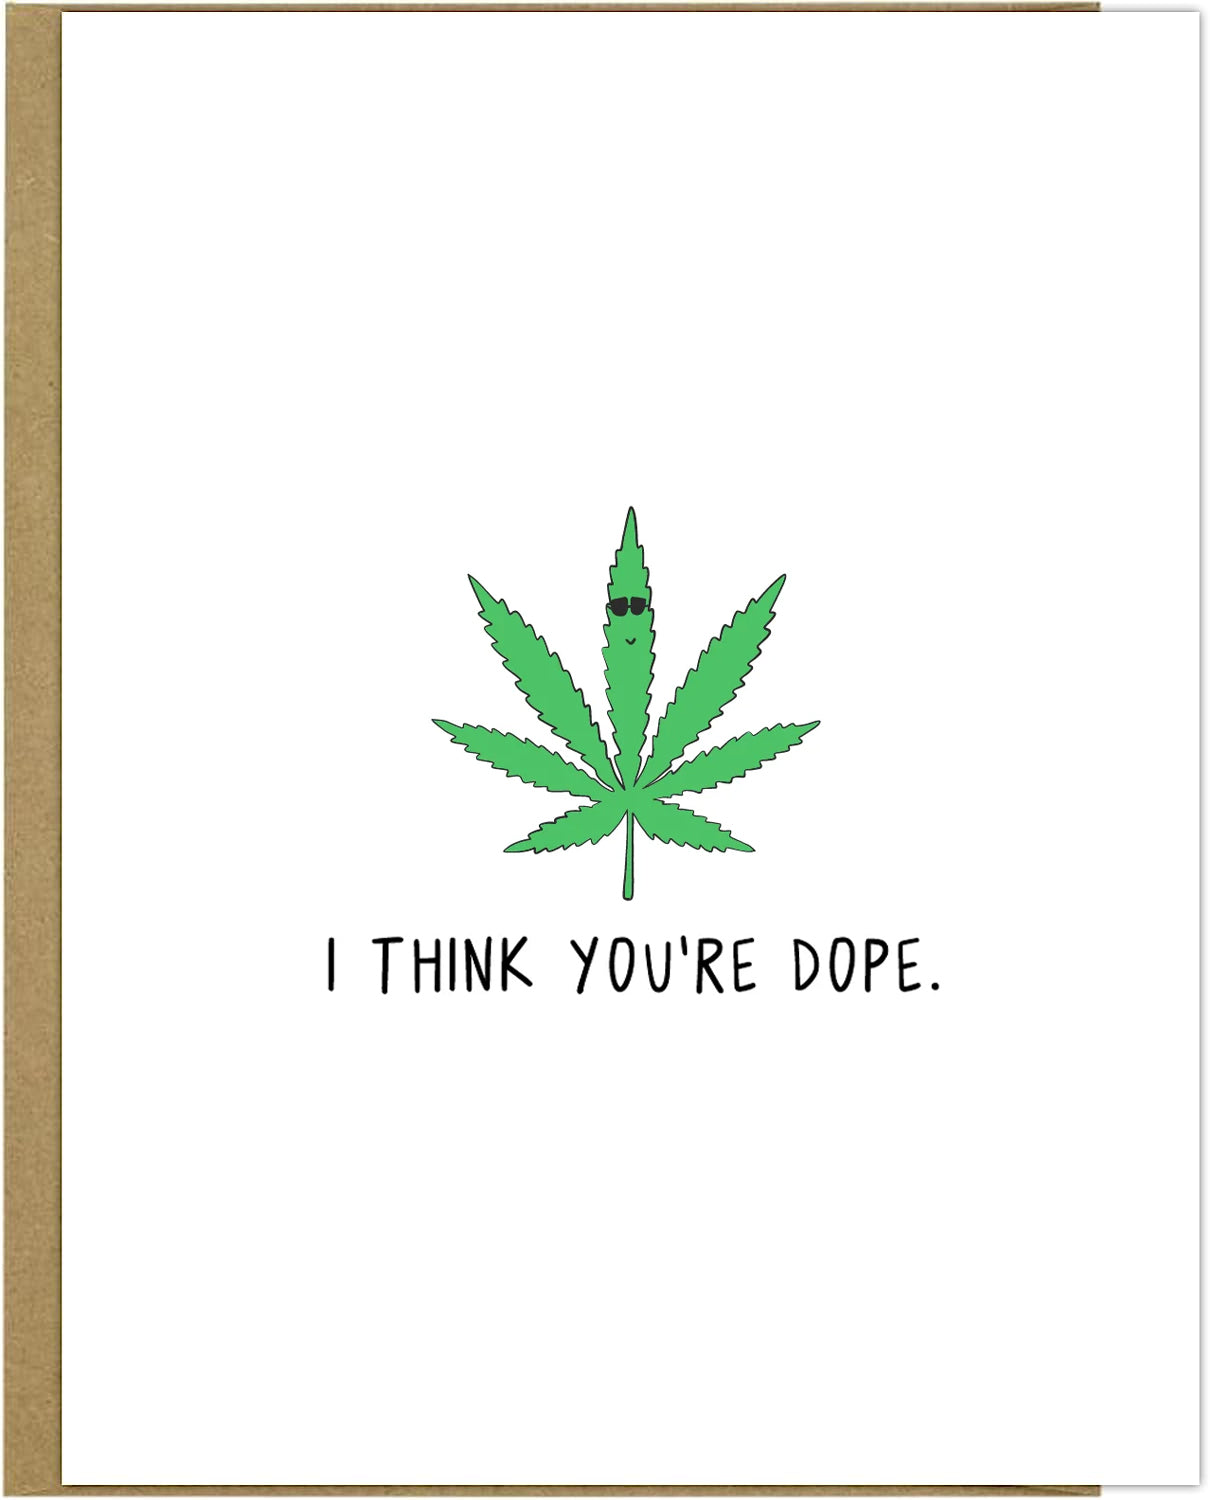 A You're Dope Card from rockdoodles, with a green leaf and black text, featuring an embossed design.